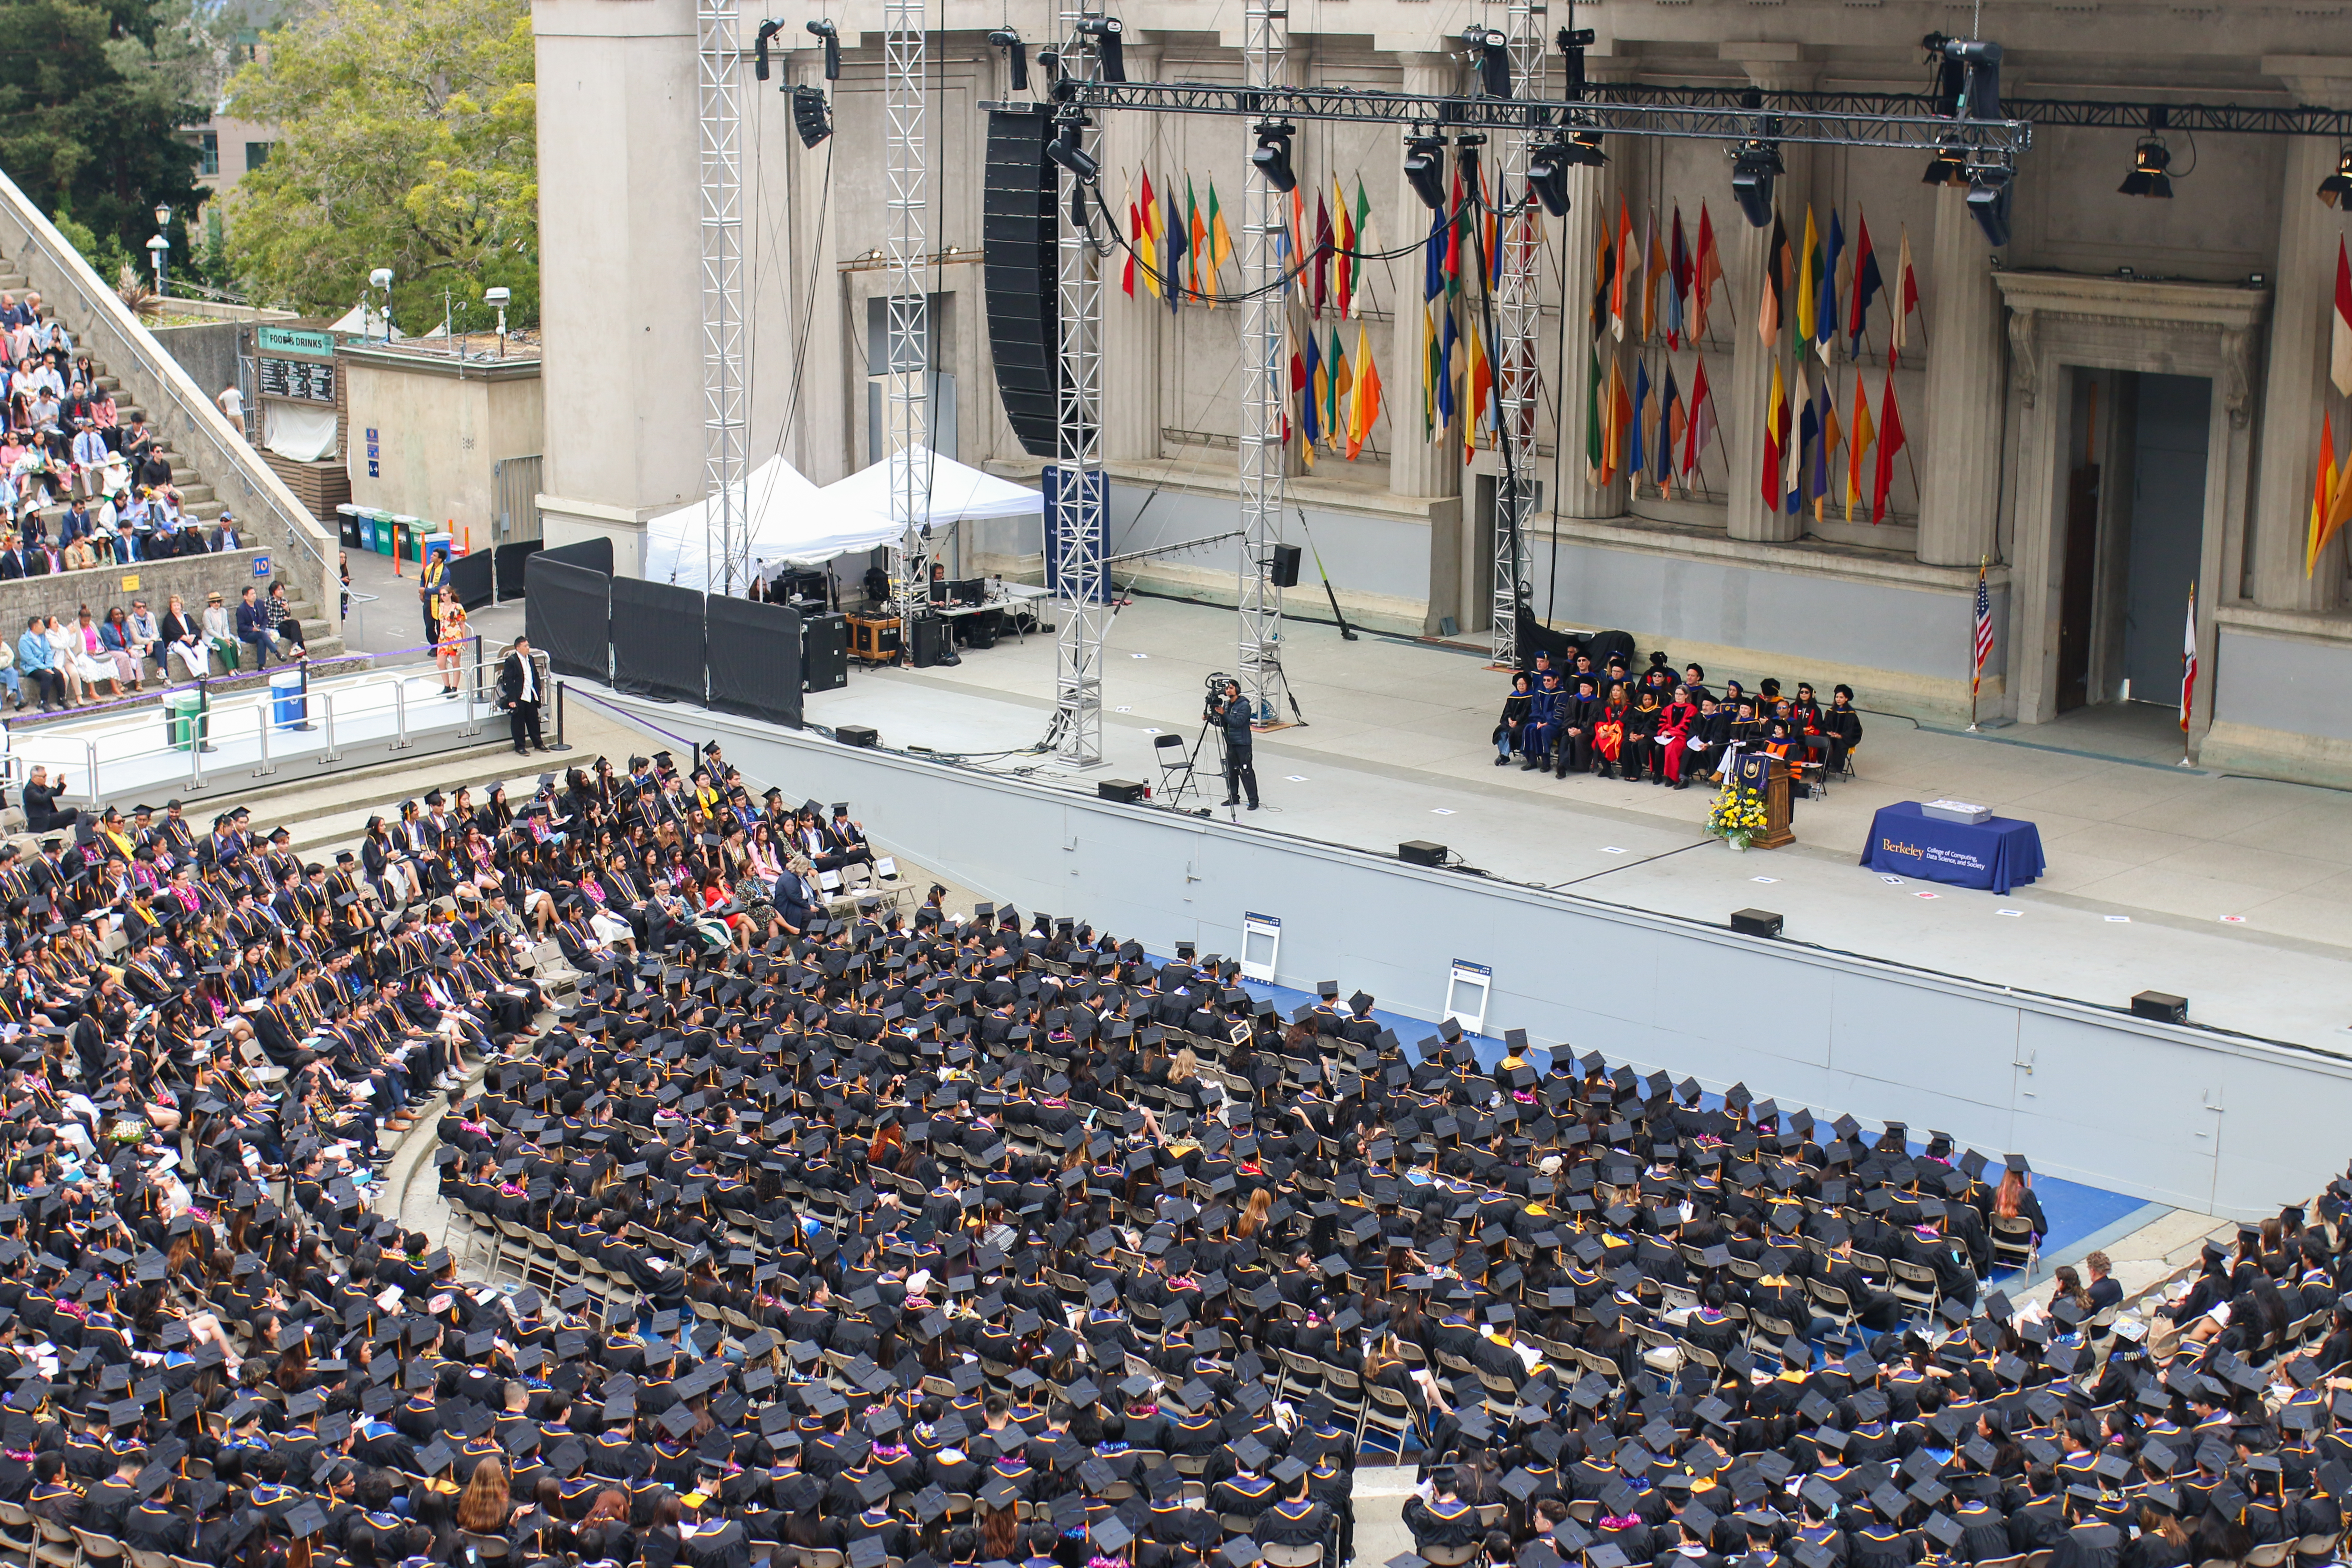 UC Berkeley's College of Computing, Data Science, and Society held two inaugural college commencement ceremonies May 16.